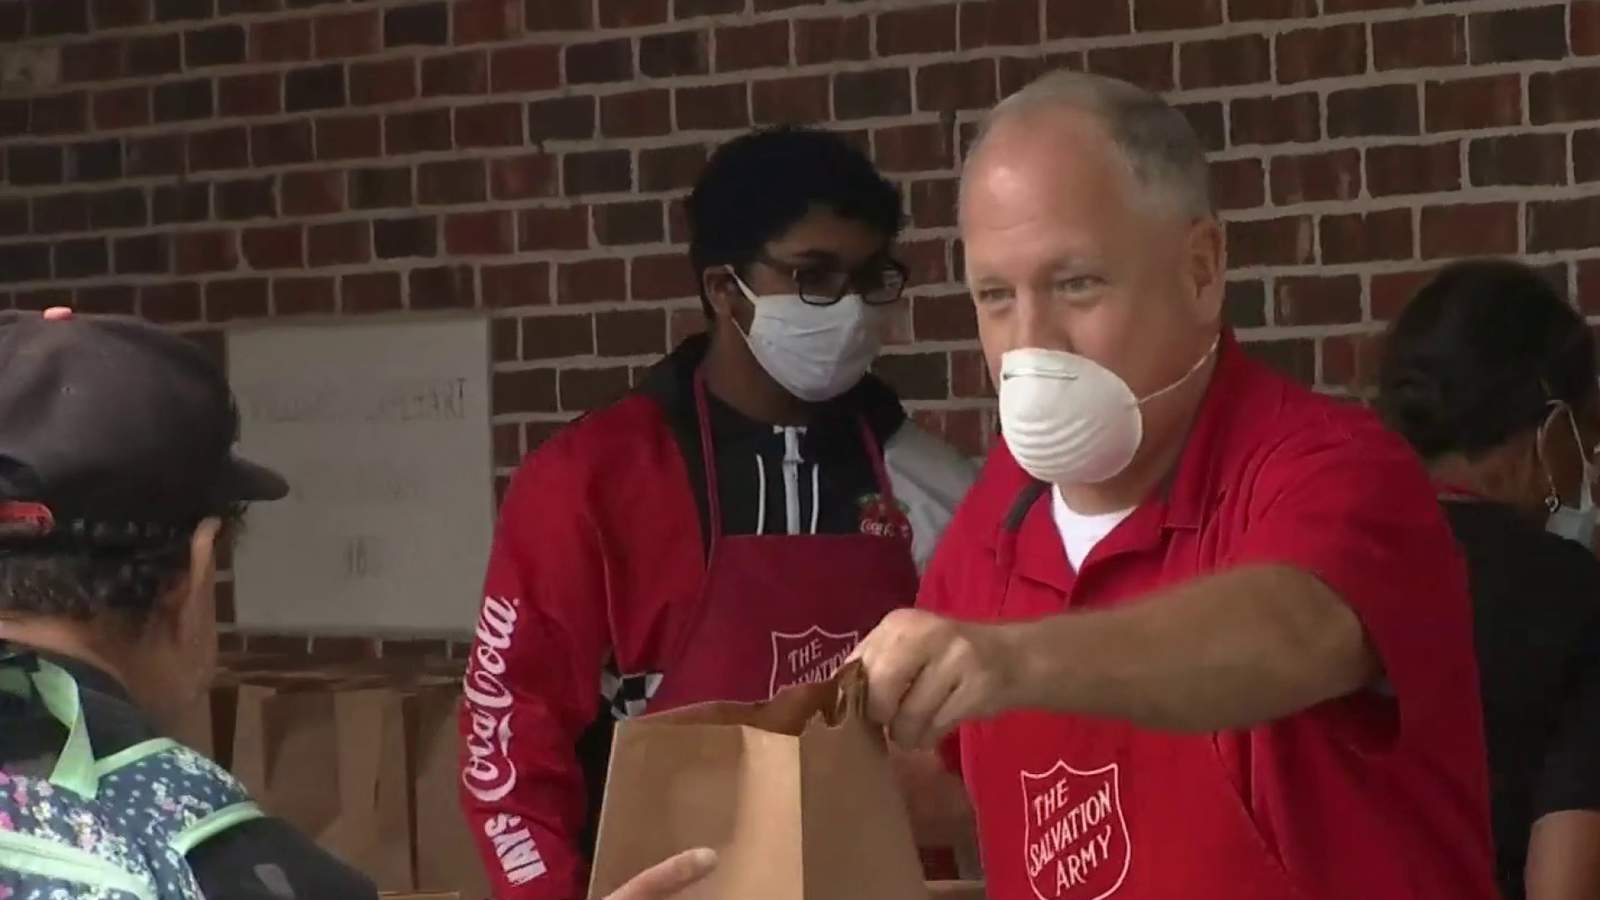 Salvation Army hosting another public food distribution on Thursday